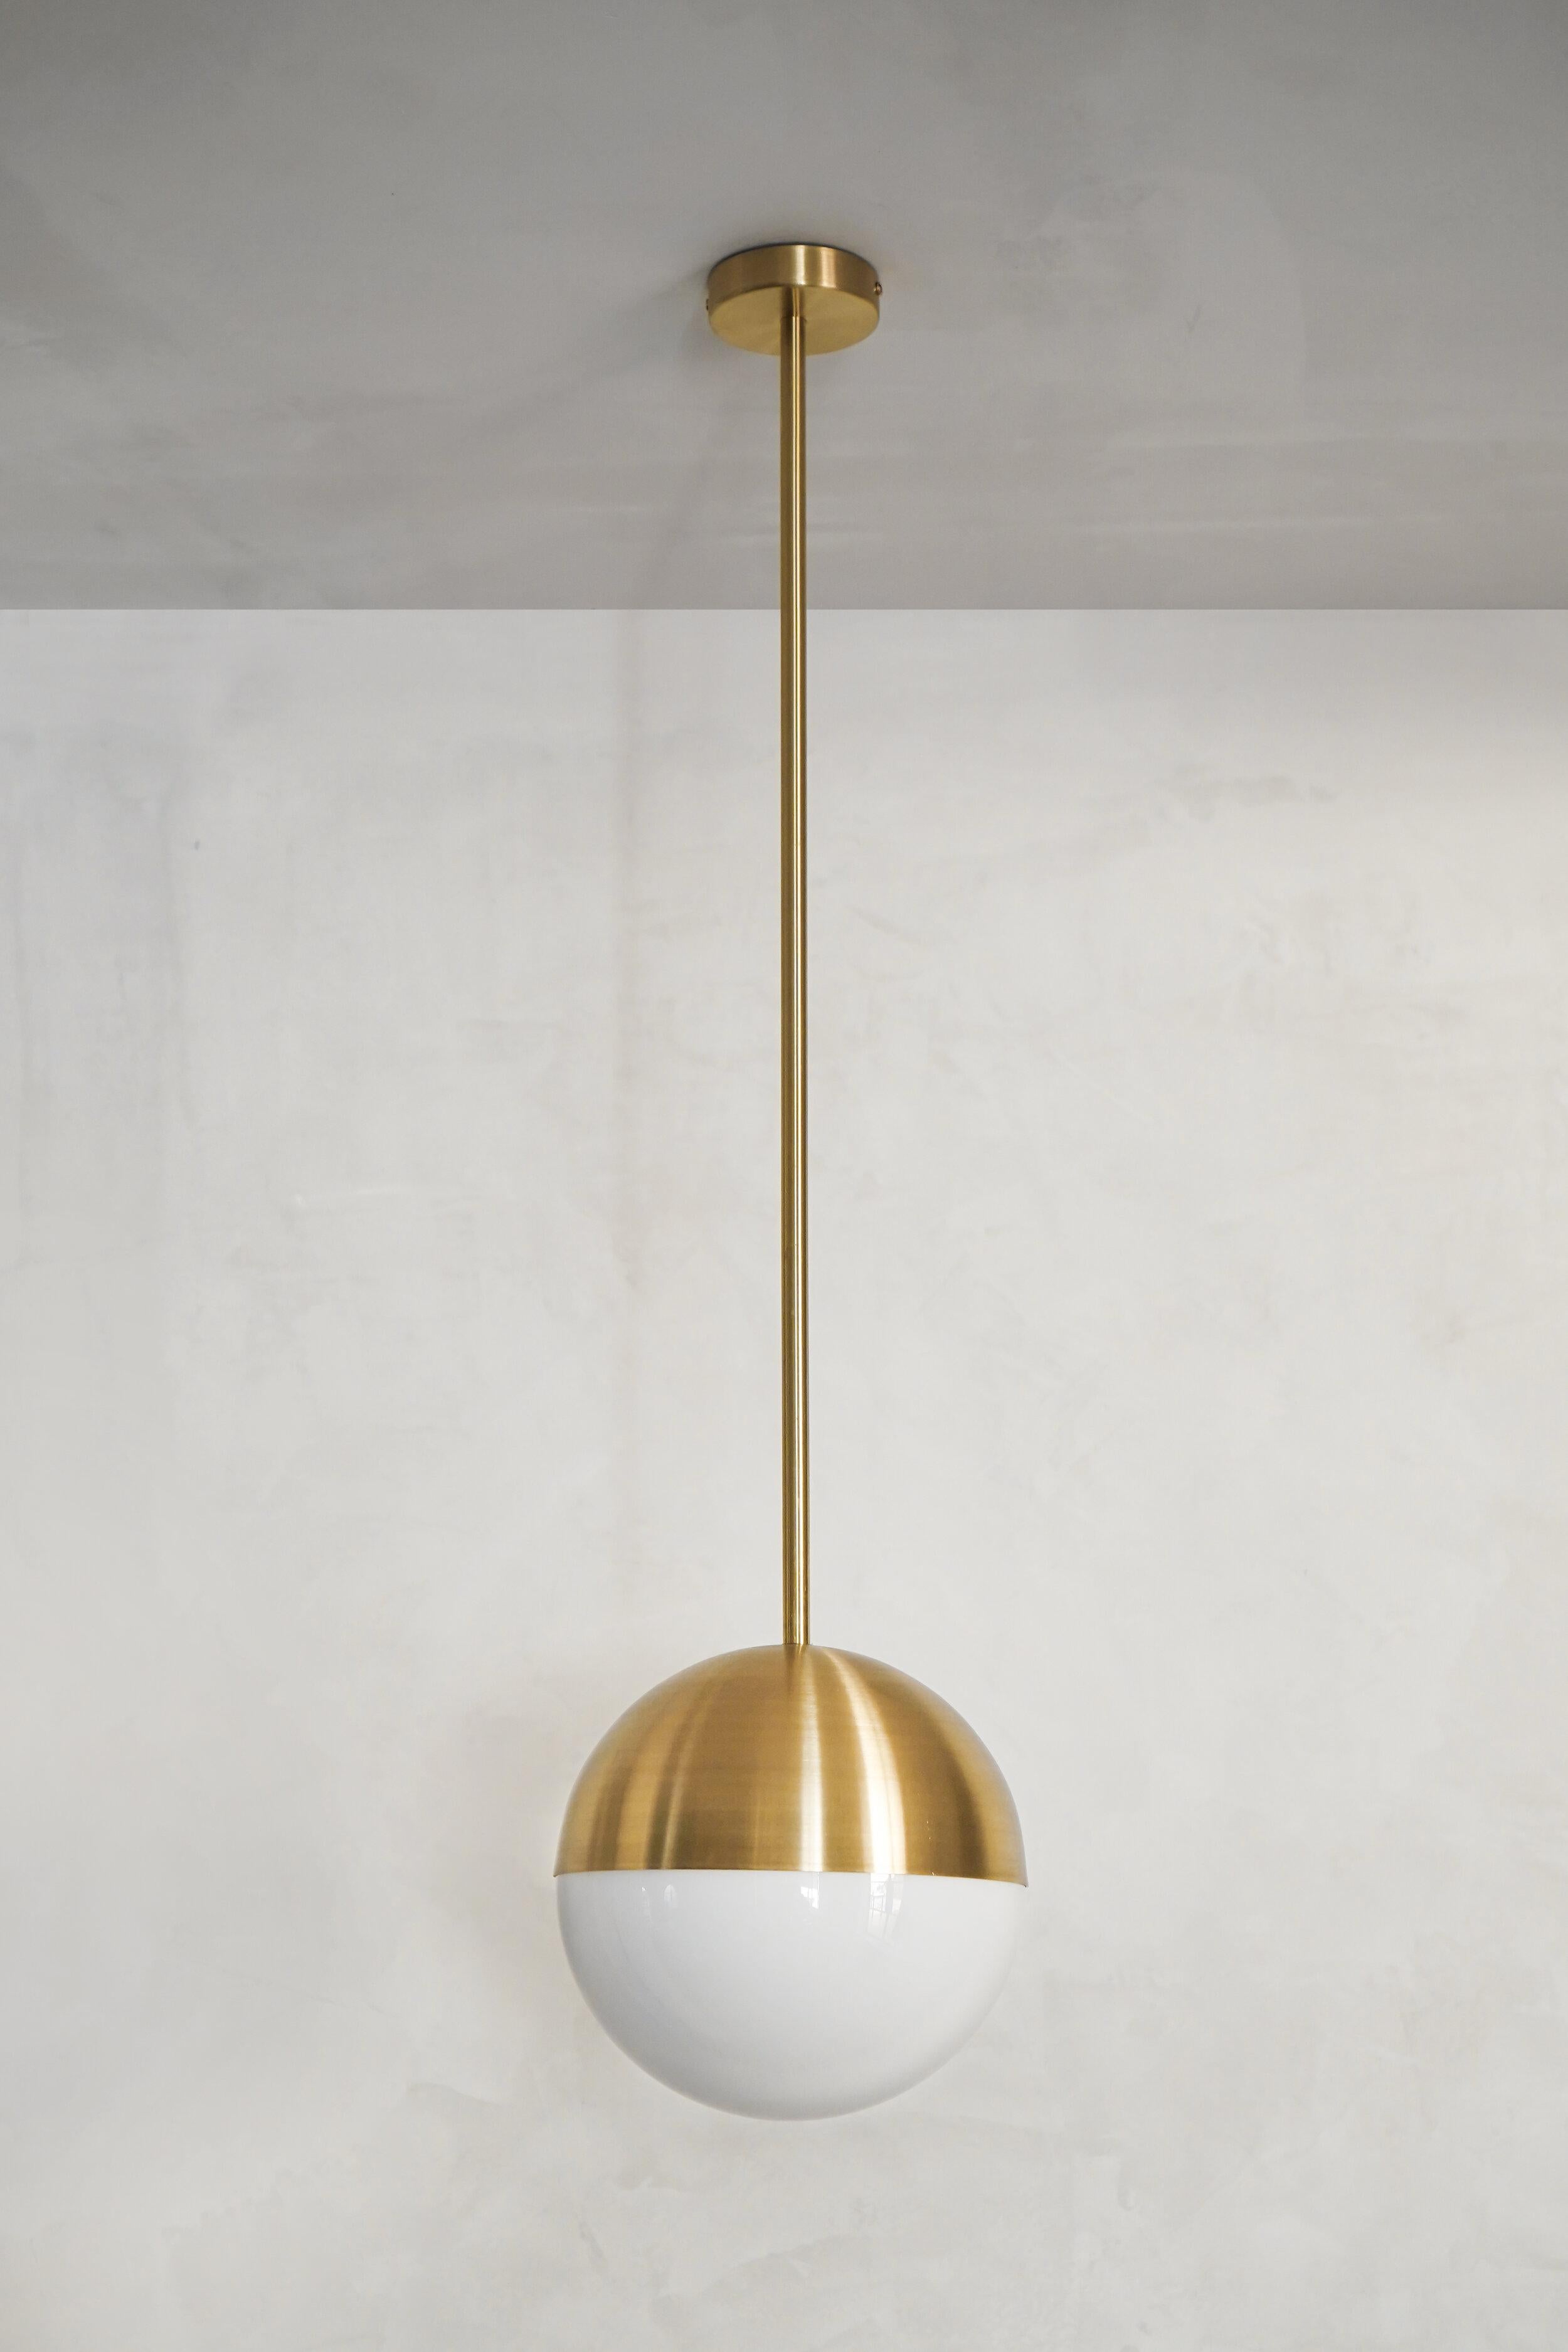 Disco half & half pendant by Contain
Dimensions: D 20 x H 100 cm (custom length).
Materials: brass structure and opal glass.
Available in different finishe. 

All our lamps can be wired according to each country. If sold to the USA it will be